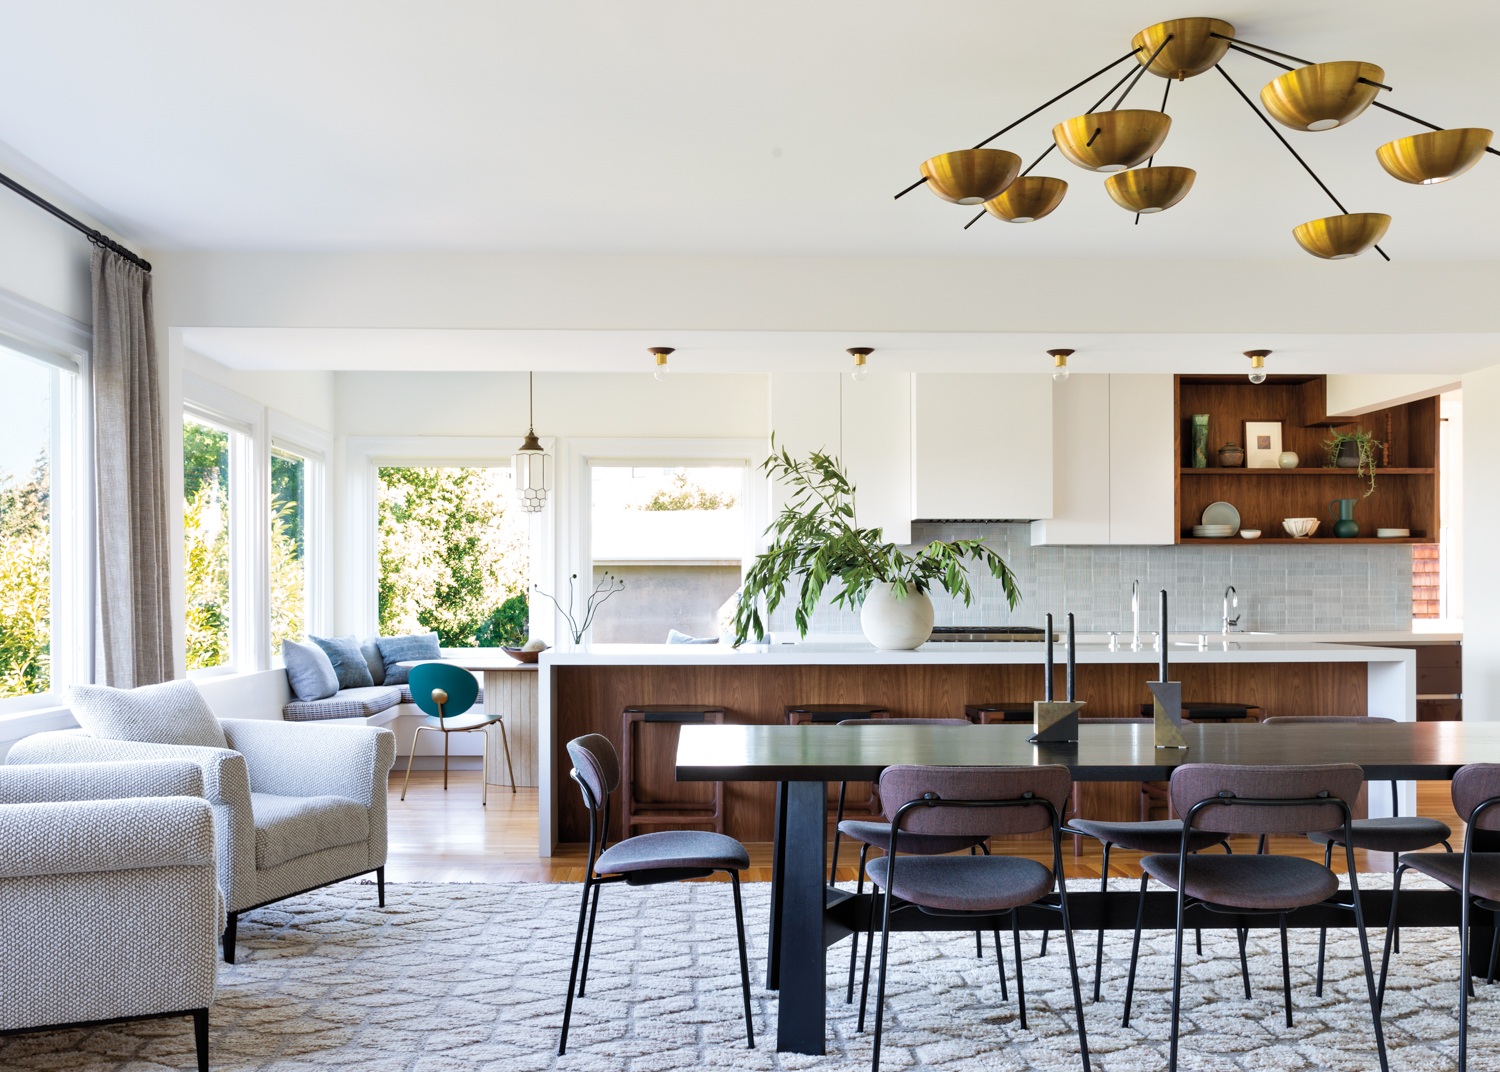 Metal-leg chairs surround a dining...